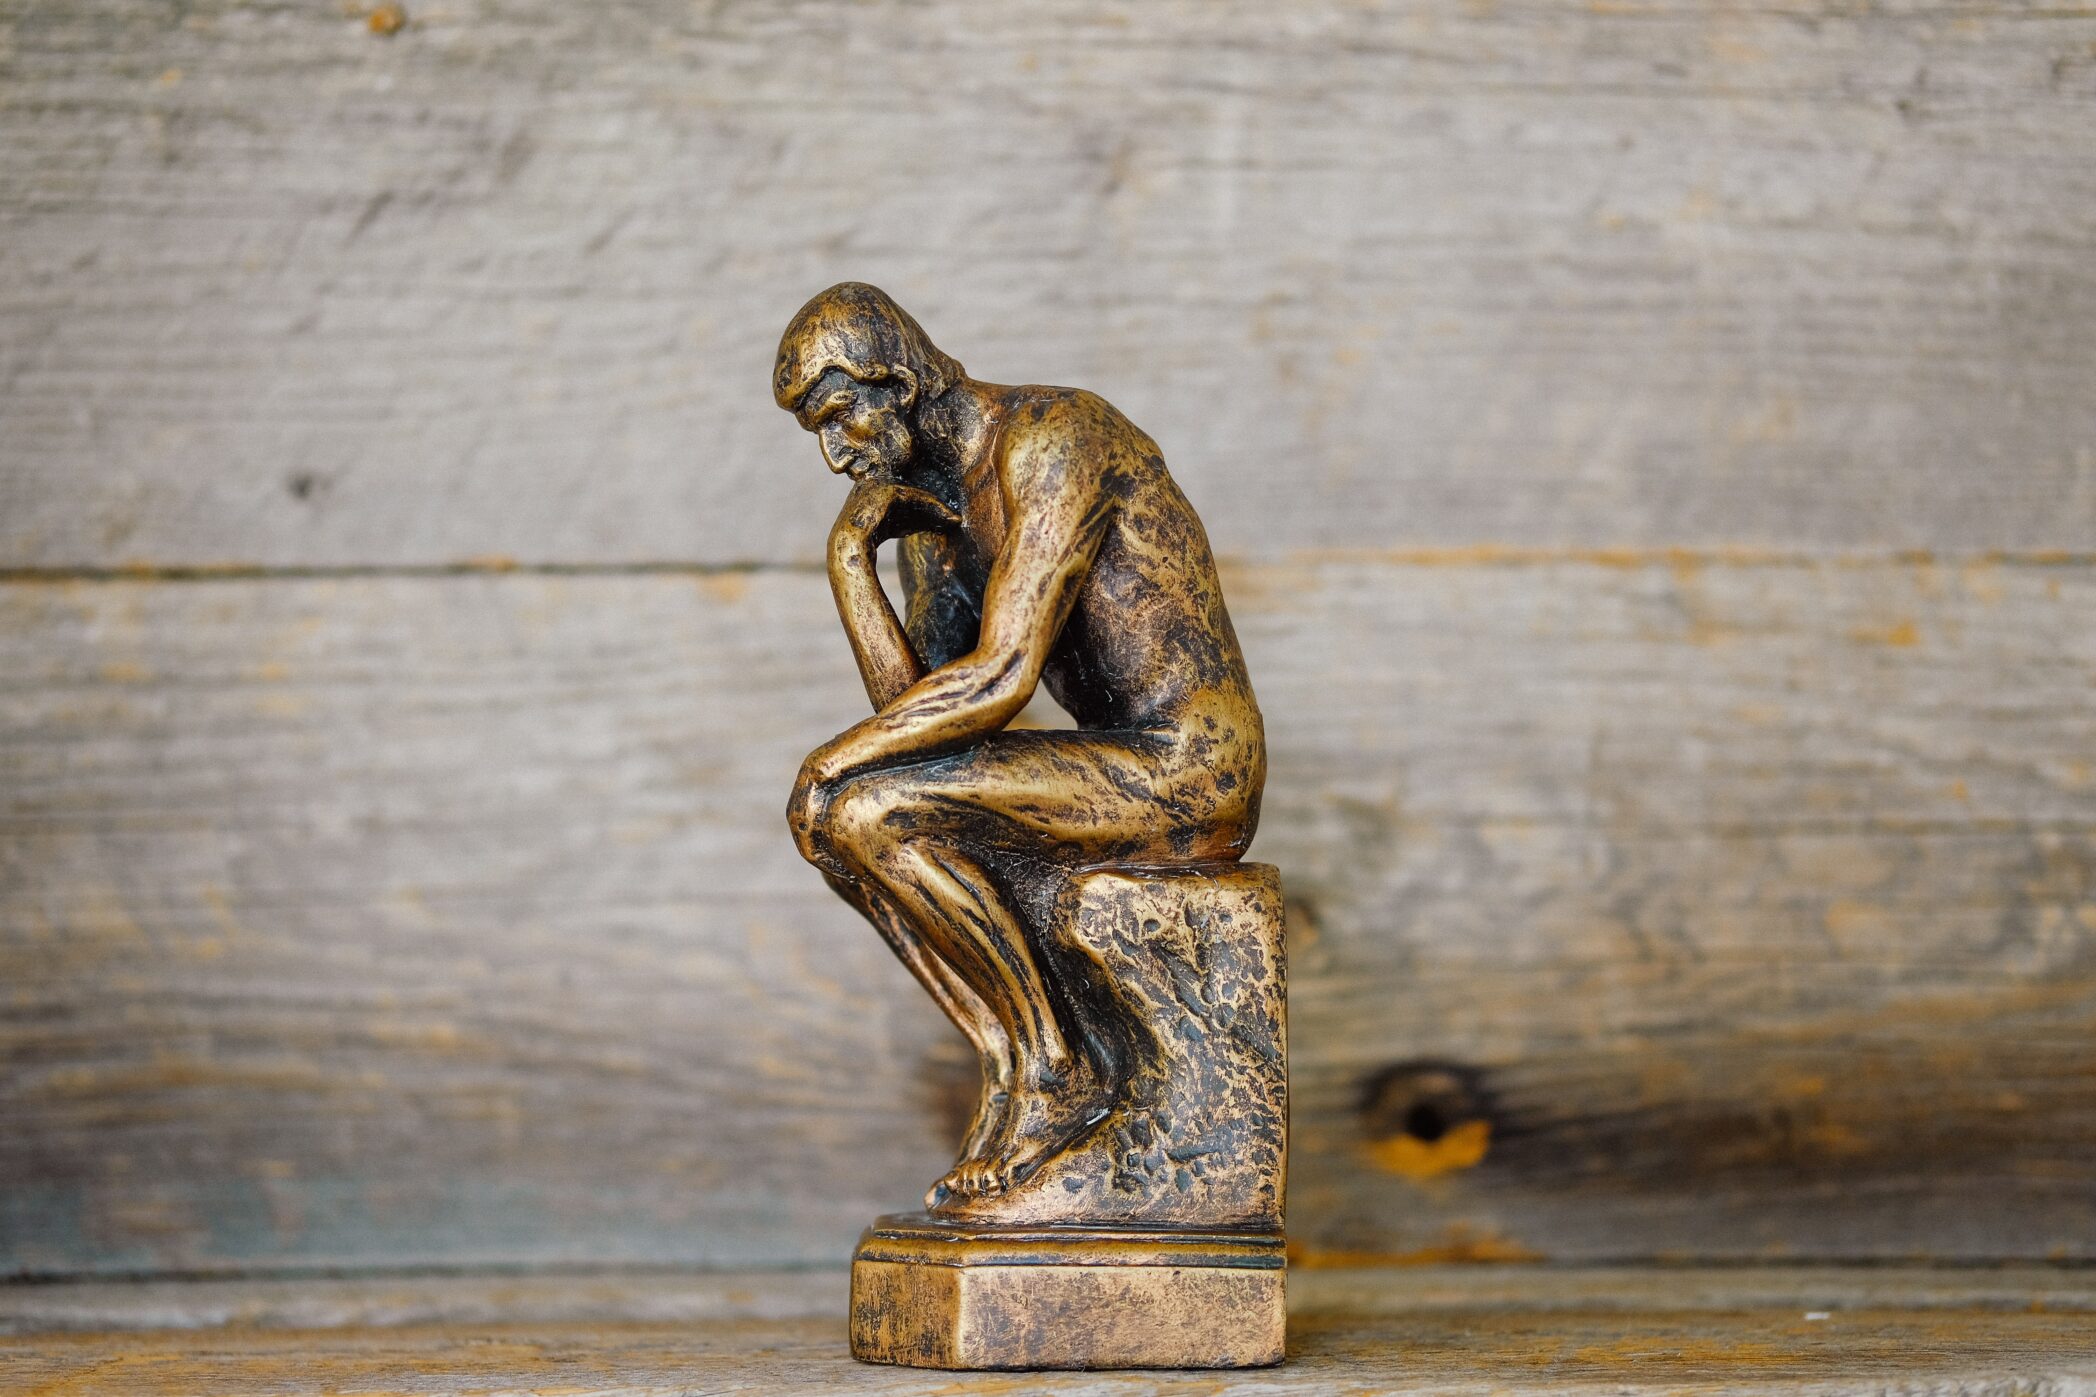 Small bronze sculpture in the style of "The Thinker"